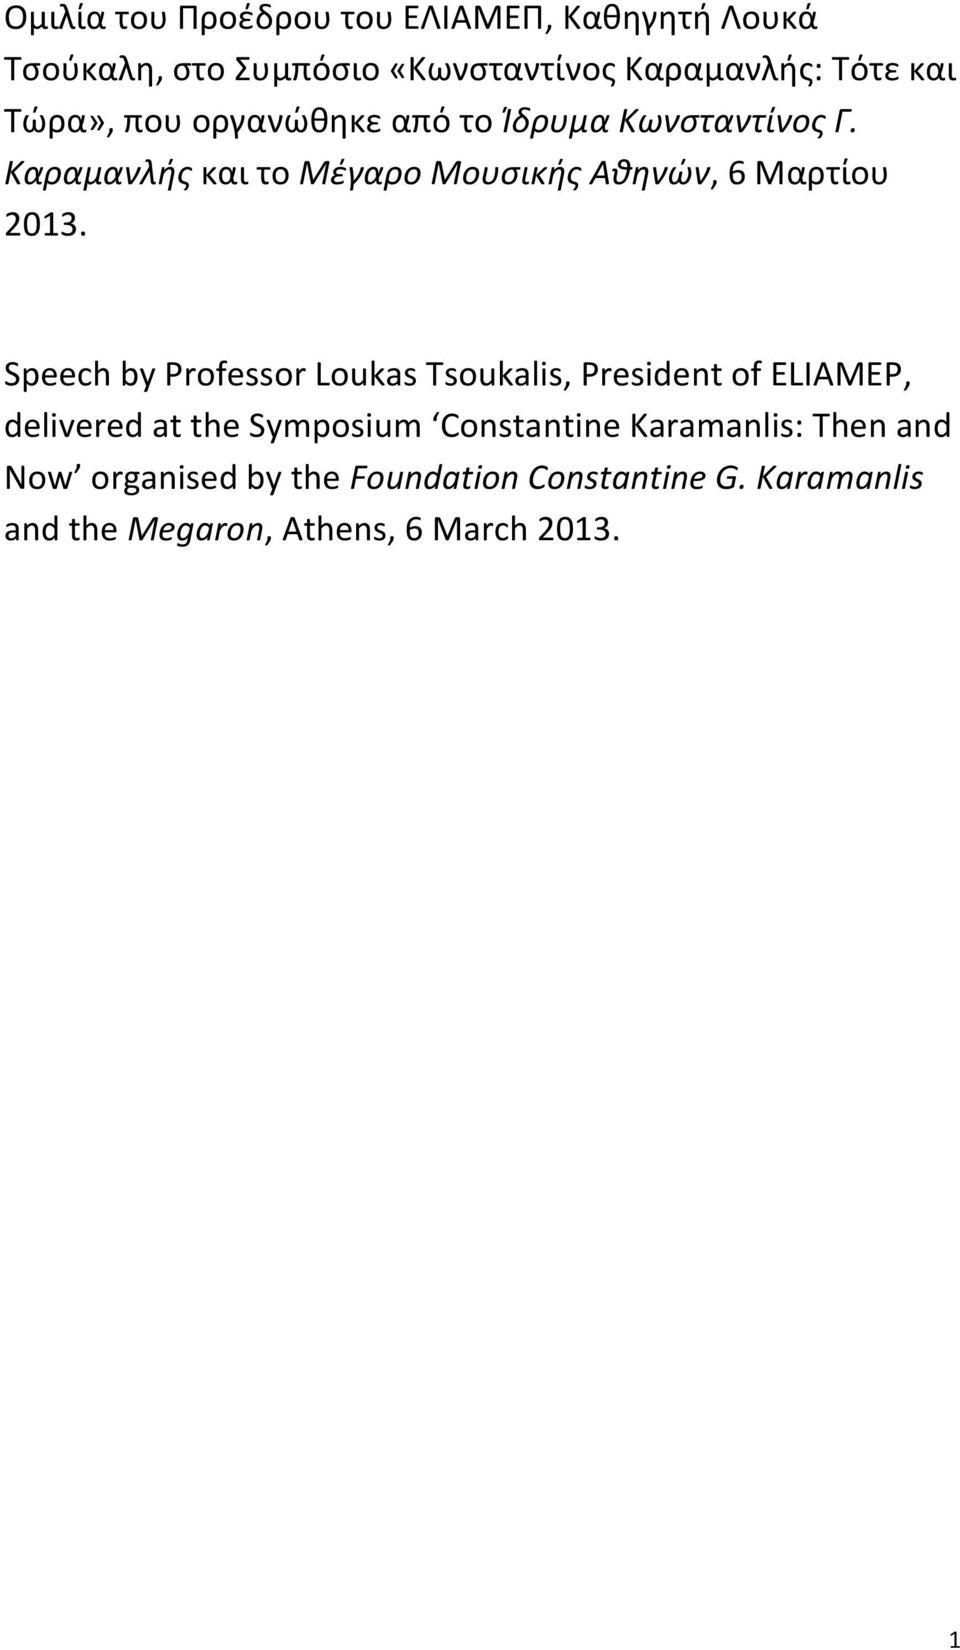 Speech by Professor Loukas Tsoukalis, President of ELIAMEP, delivered at the Symposium Constantine